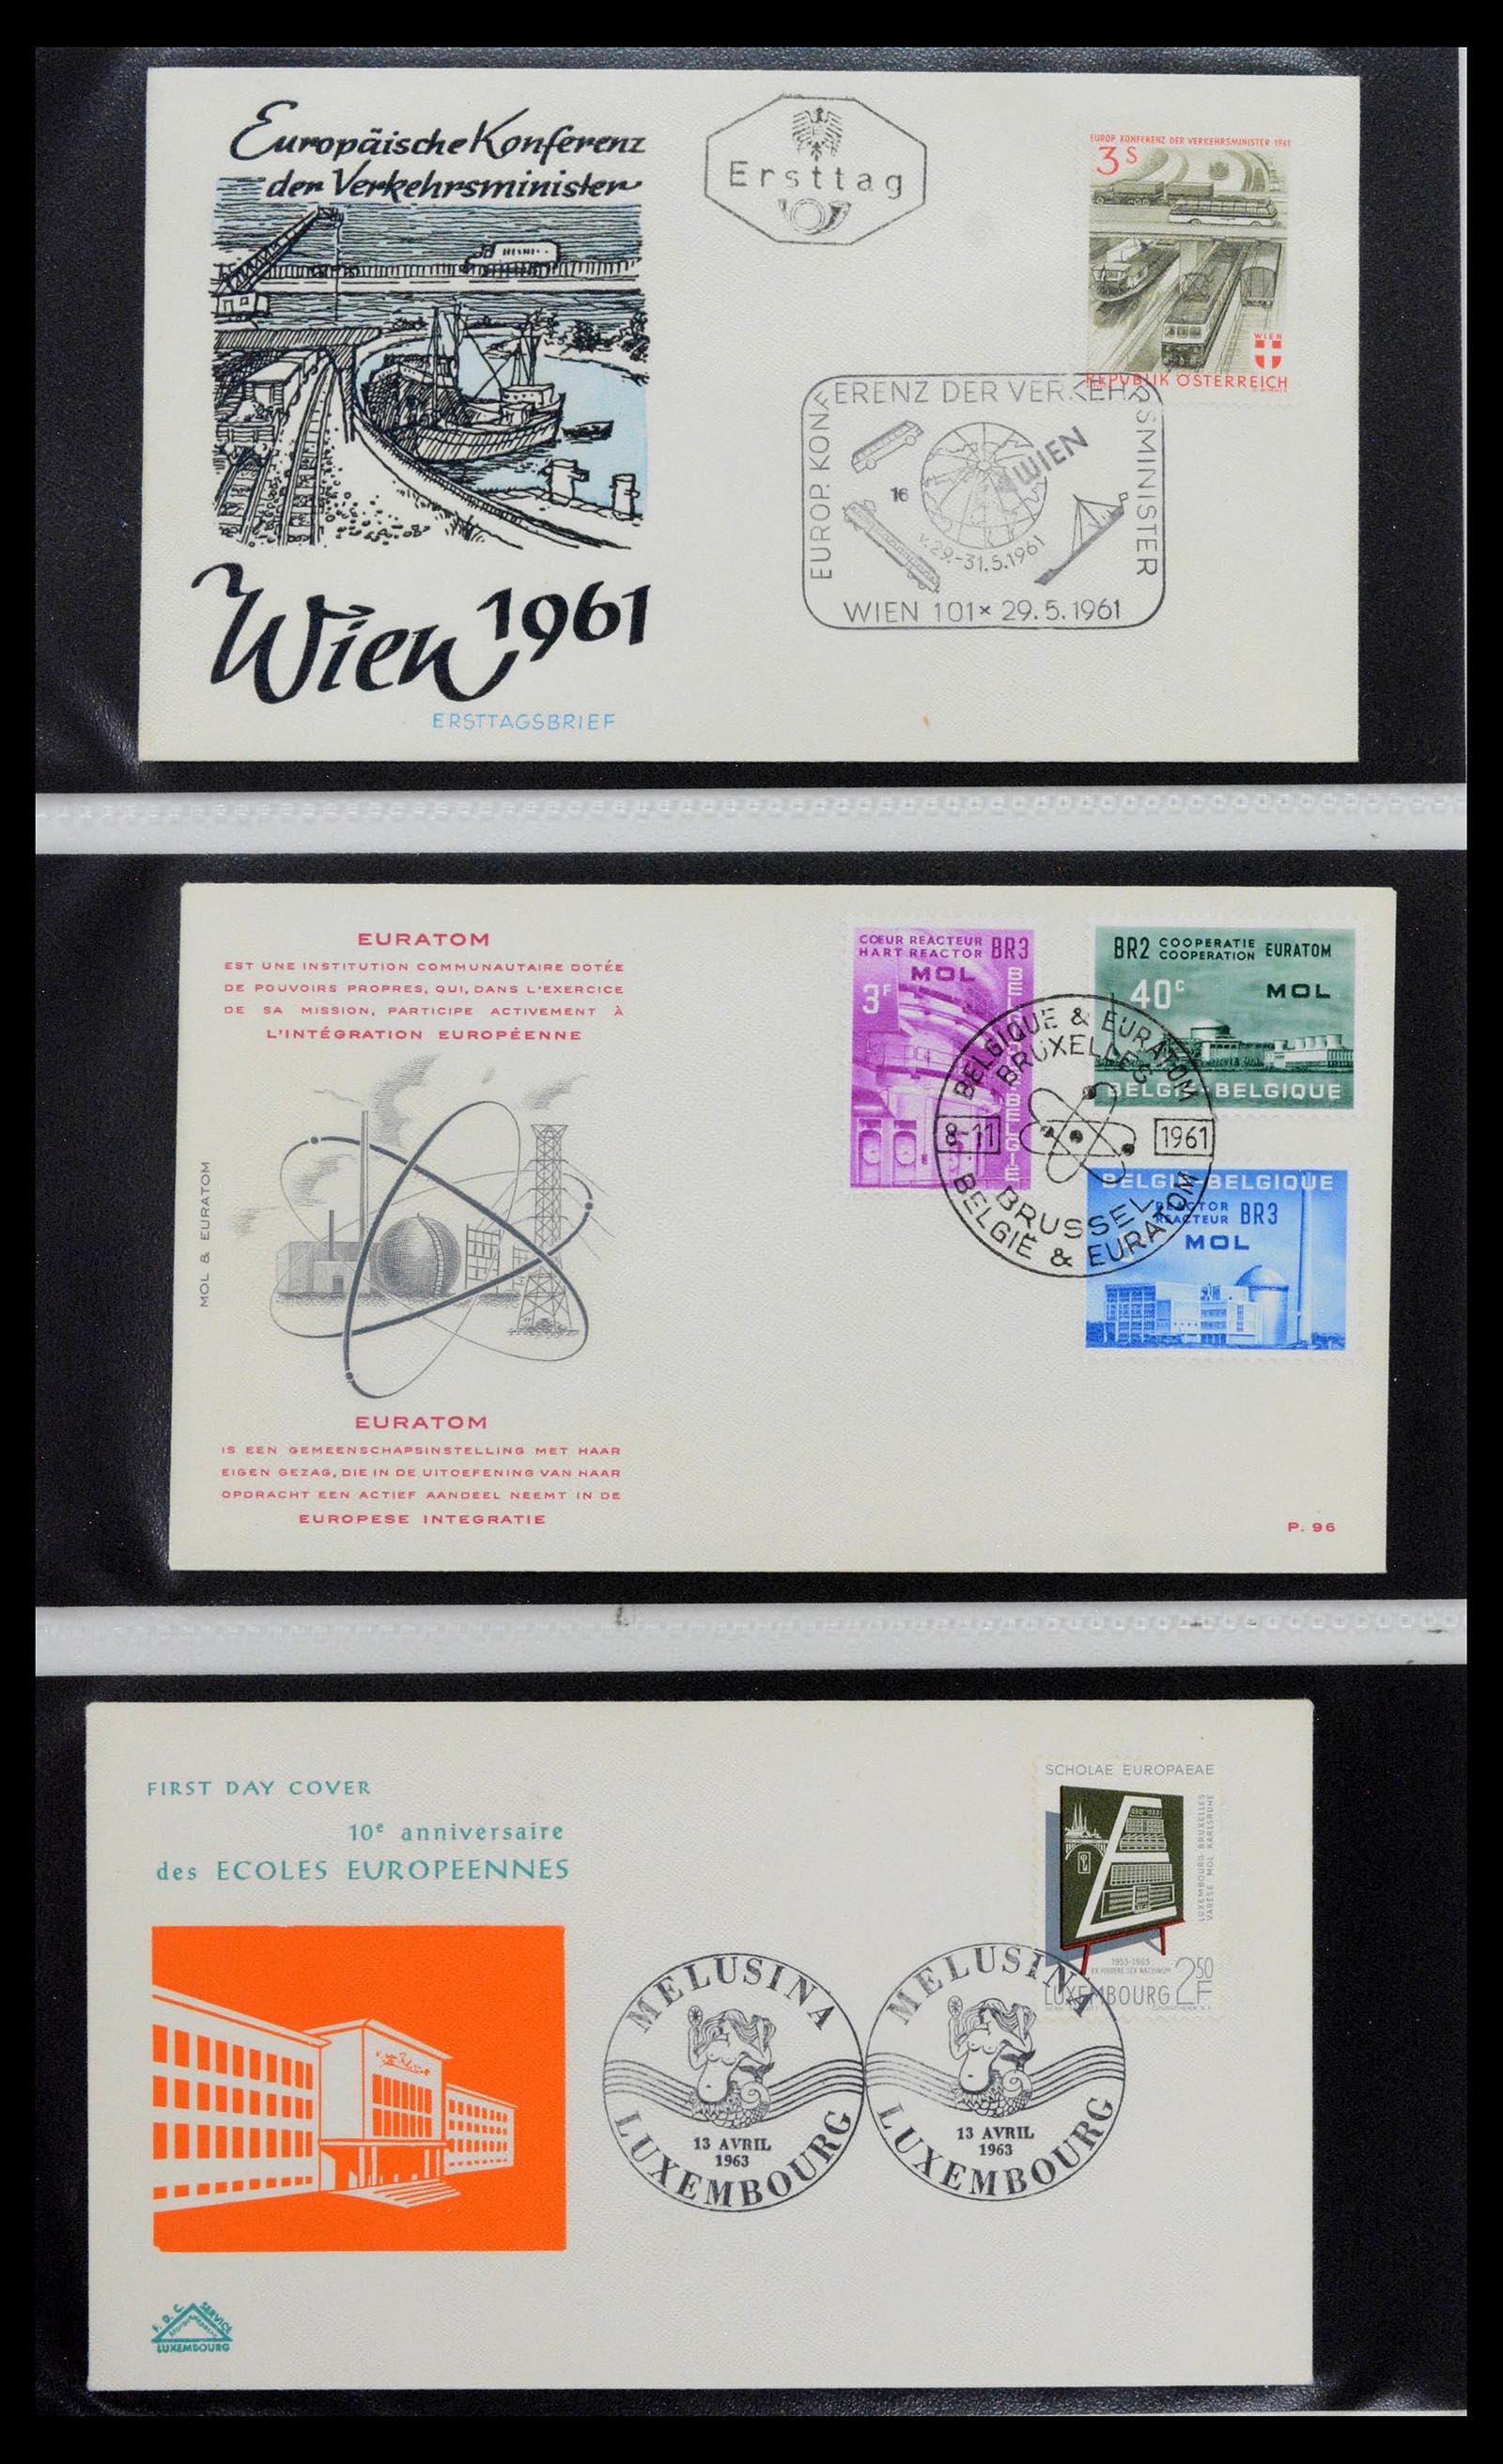 38559 0095 - Stamp collection 38559 Netherlands special first day covers.